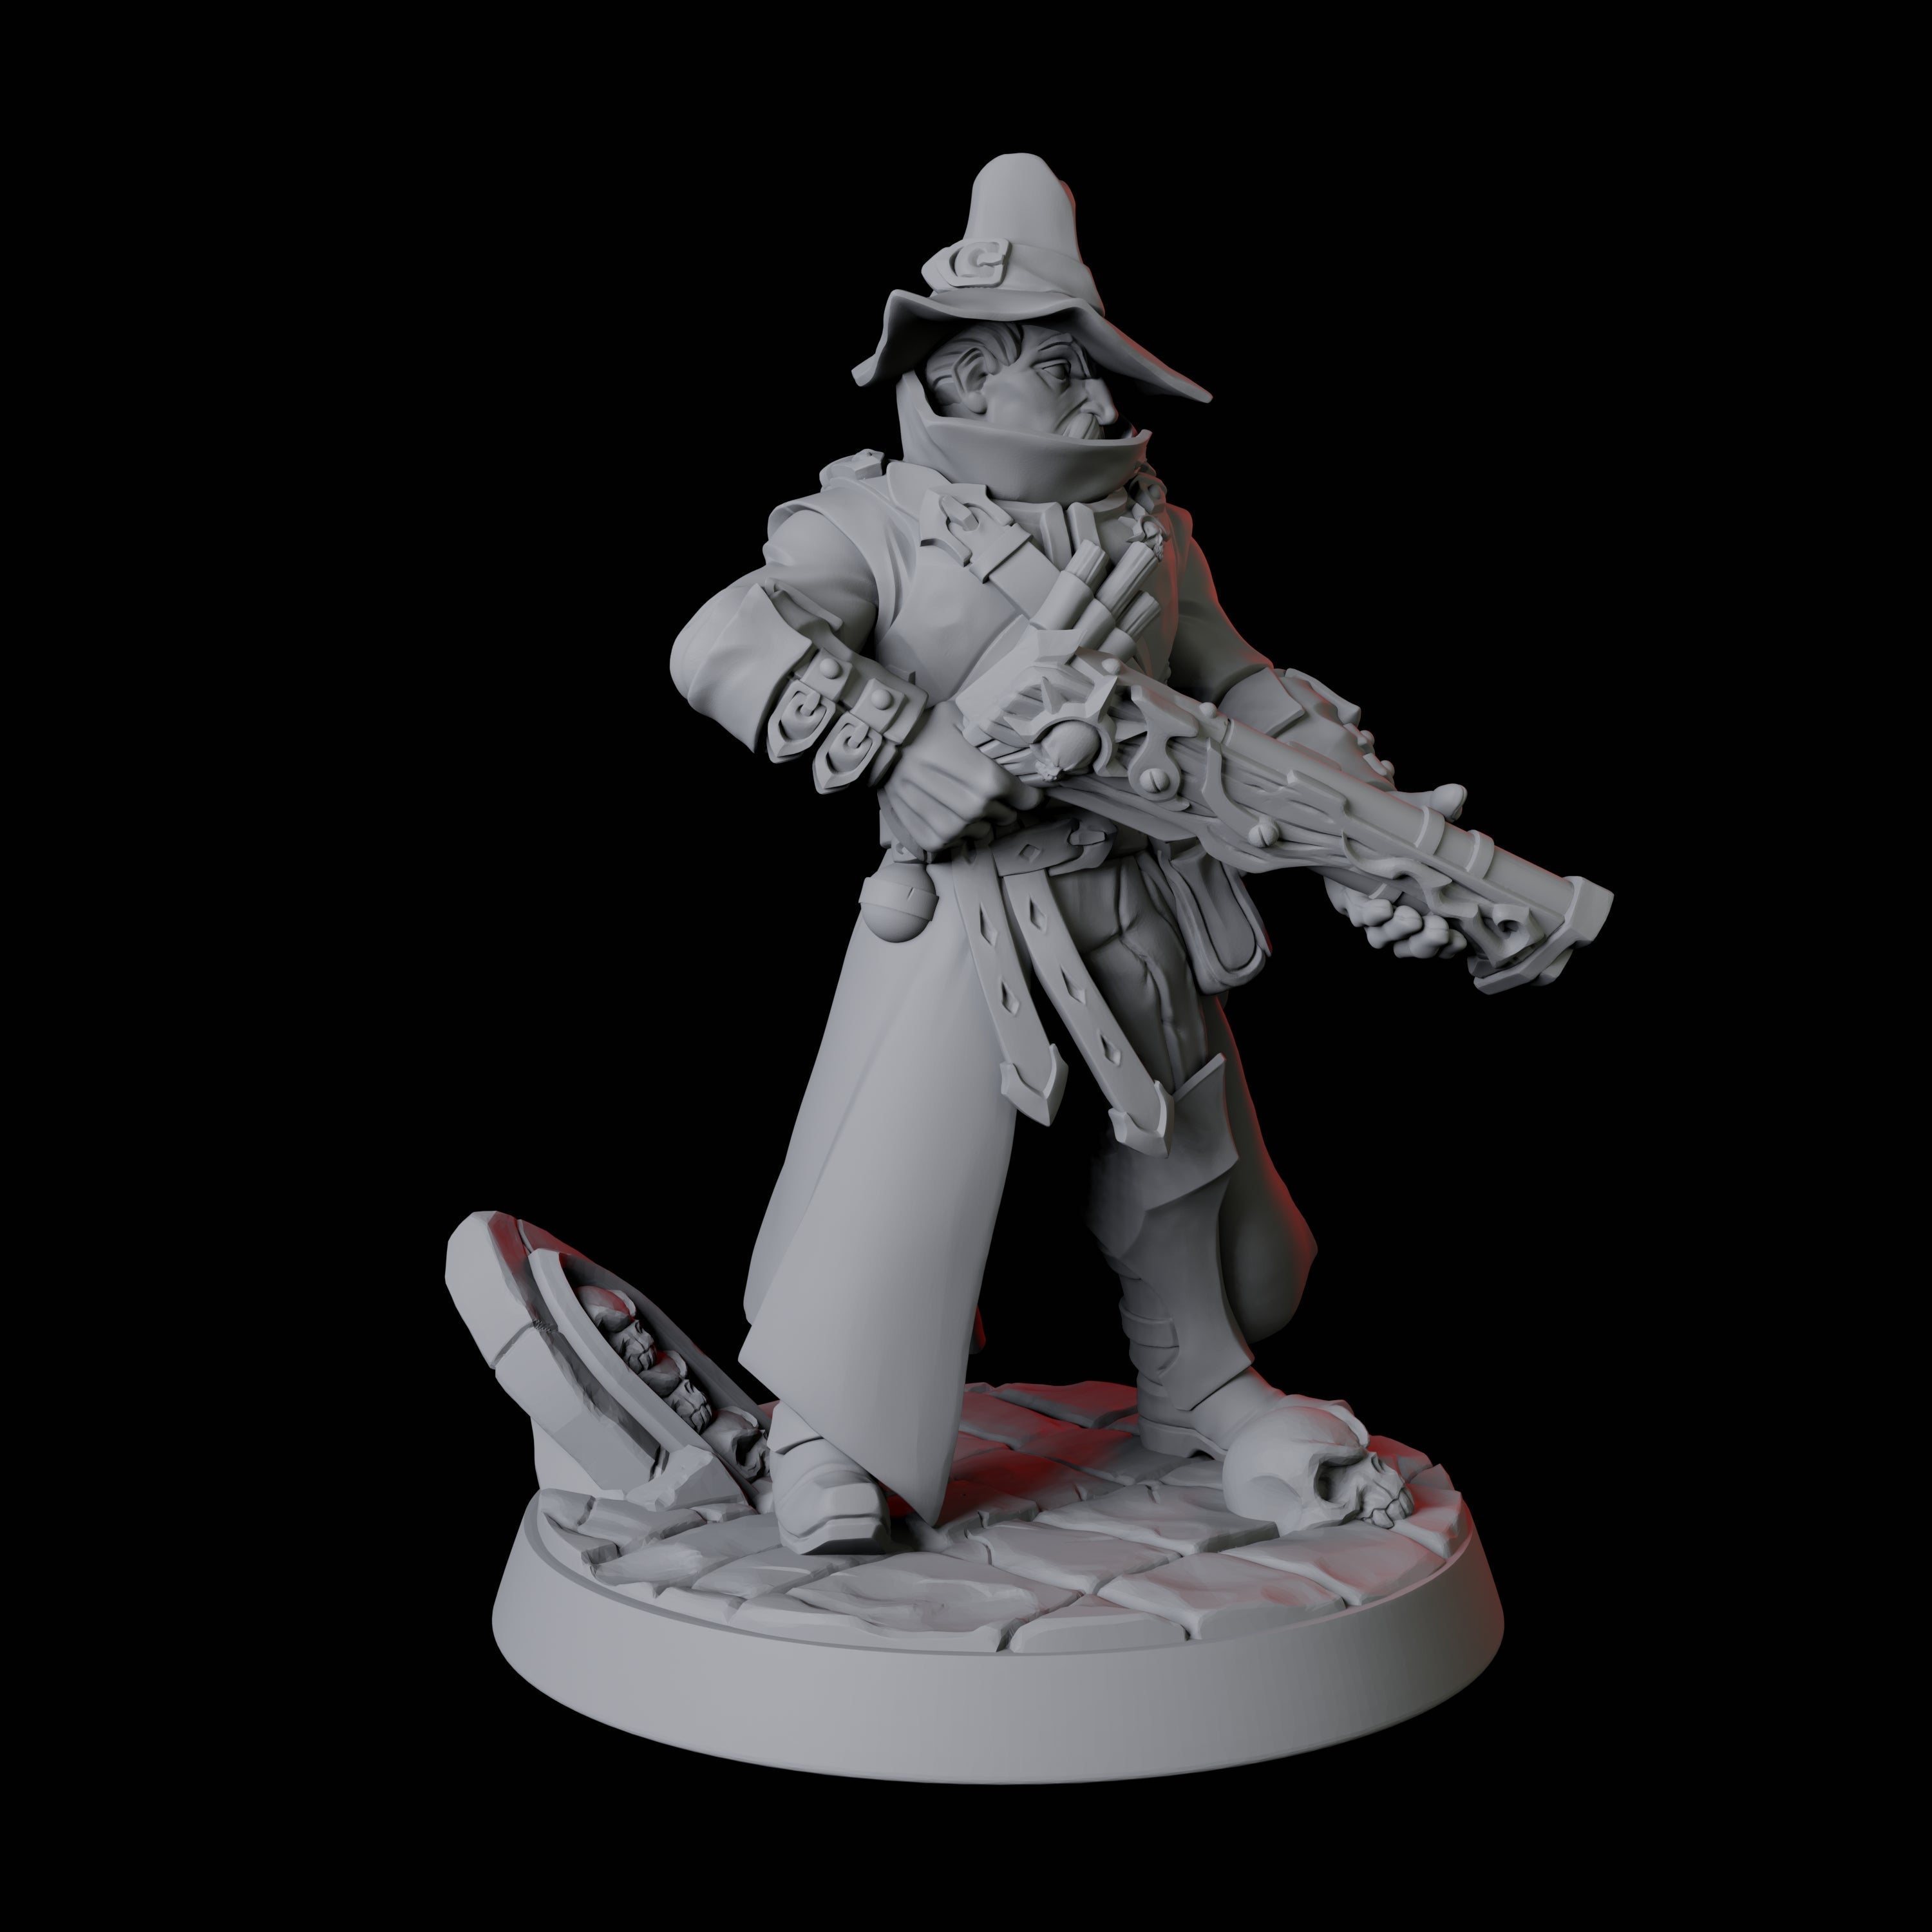 Vampire Hunter C Miniature for Dungeons and Dragons, Pathfinder or other TTRPGs